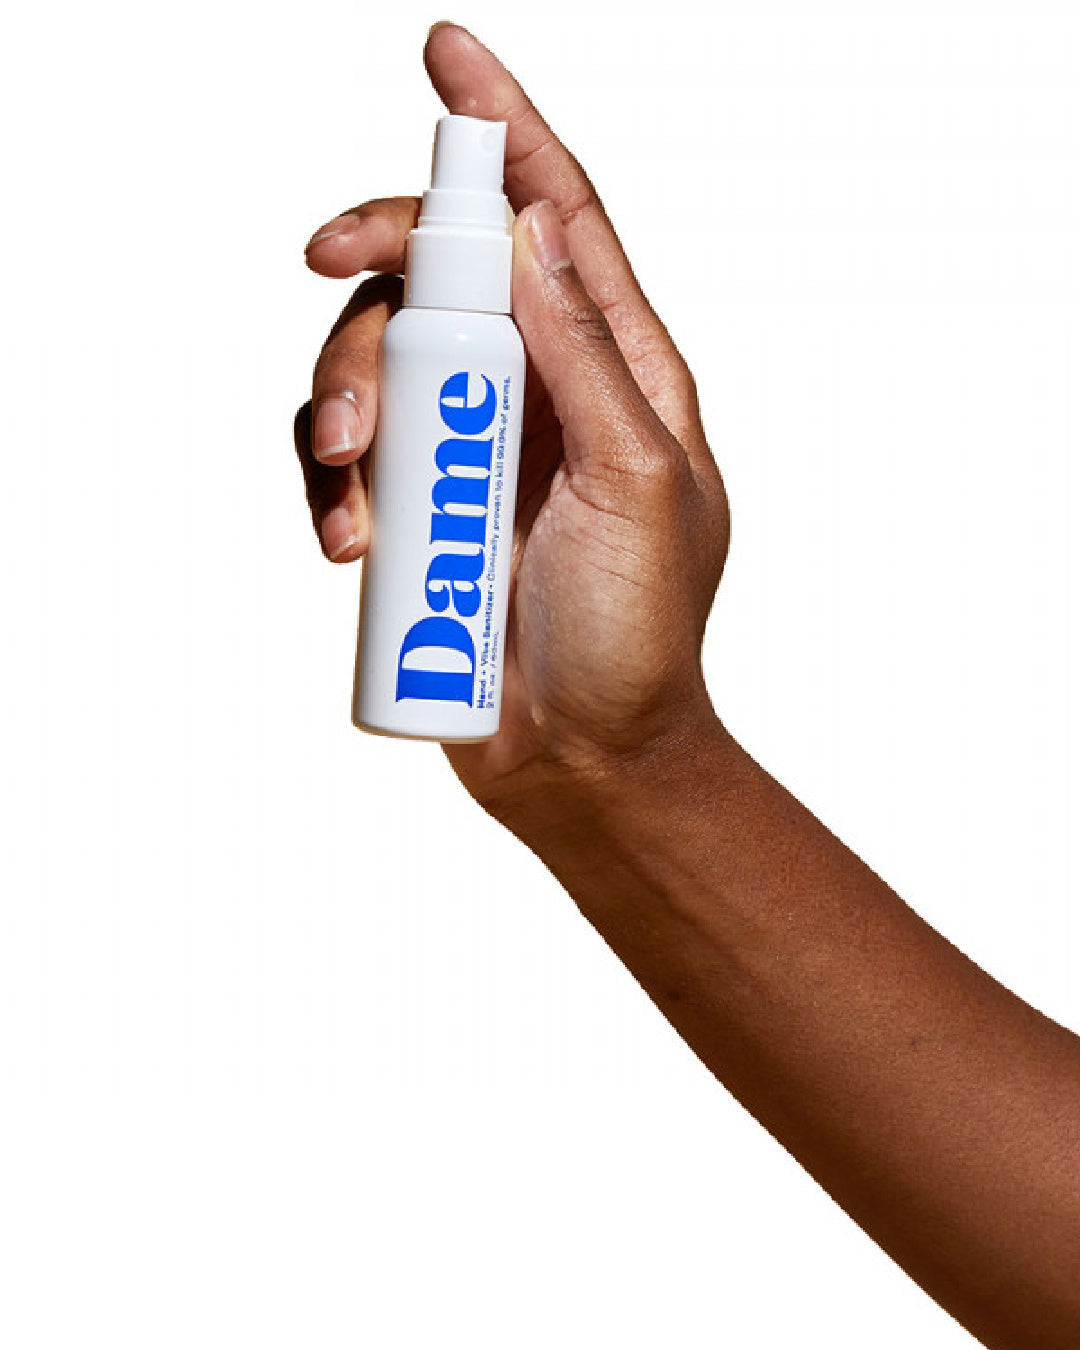 Dame Hand and Toy Cleaner white bottle with blue writing held in model's hand 